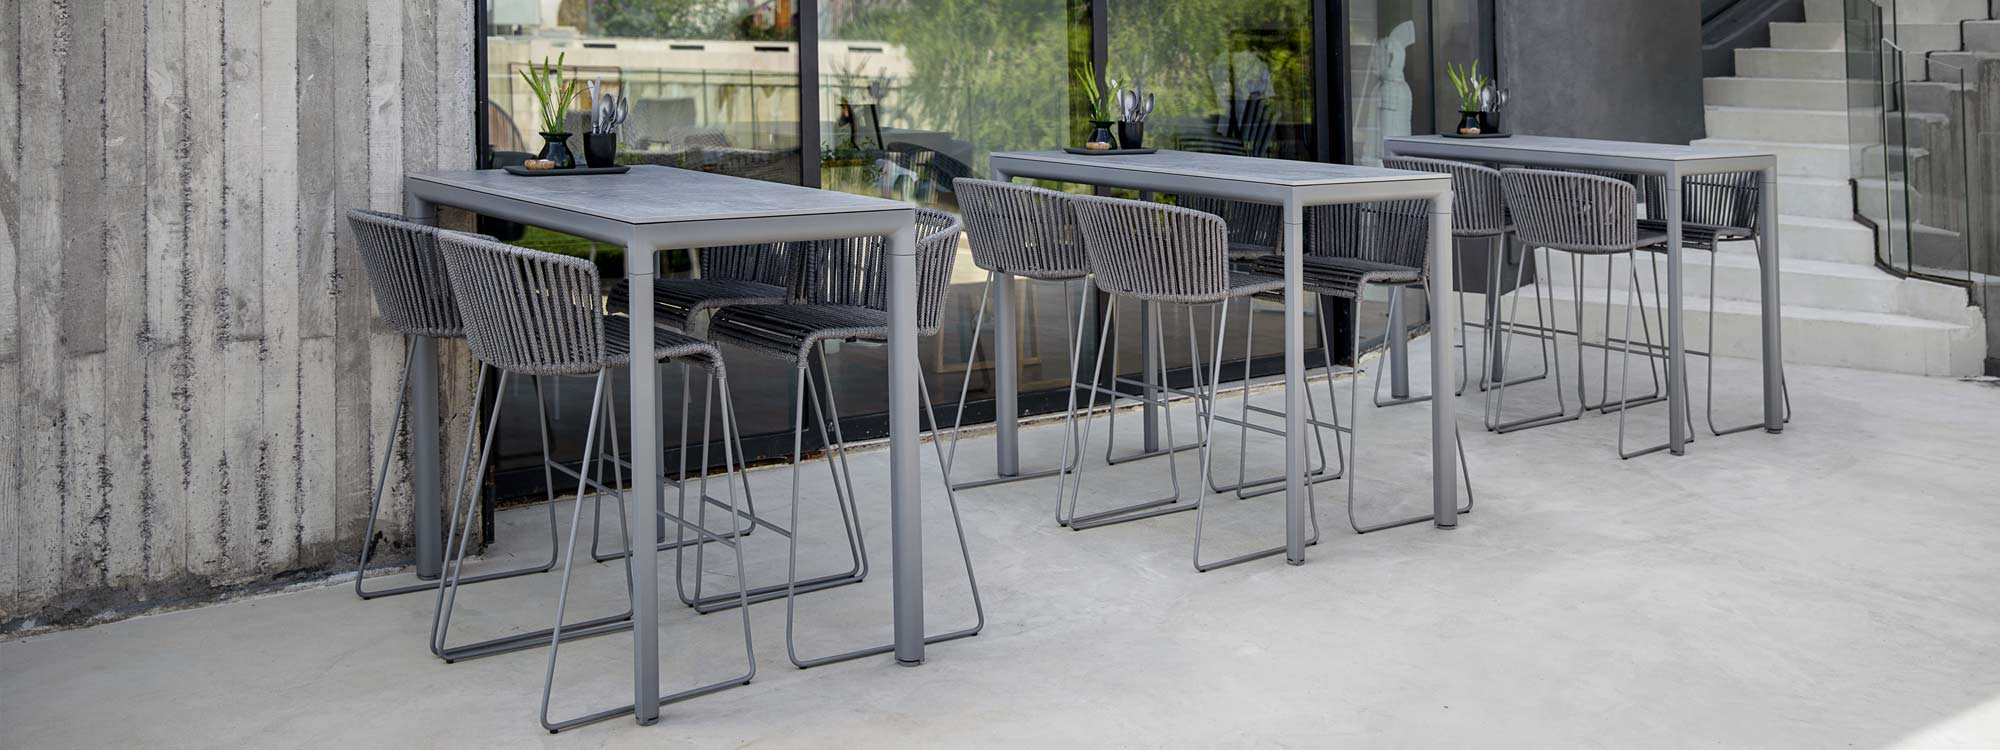 Image of row of grey Drop bar tables and grey bar stools by Cane-line, shown on outdoor terrace